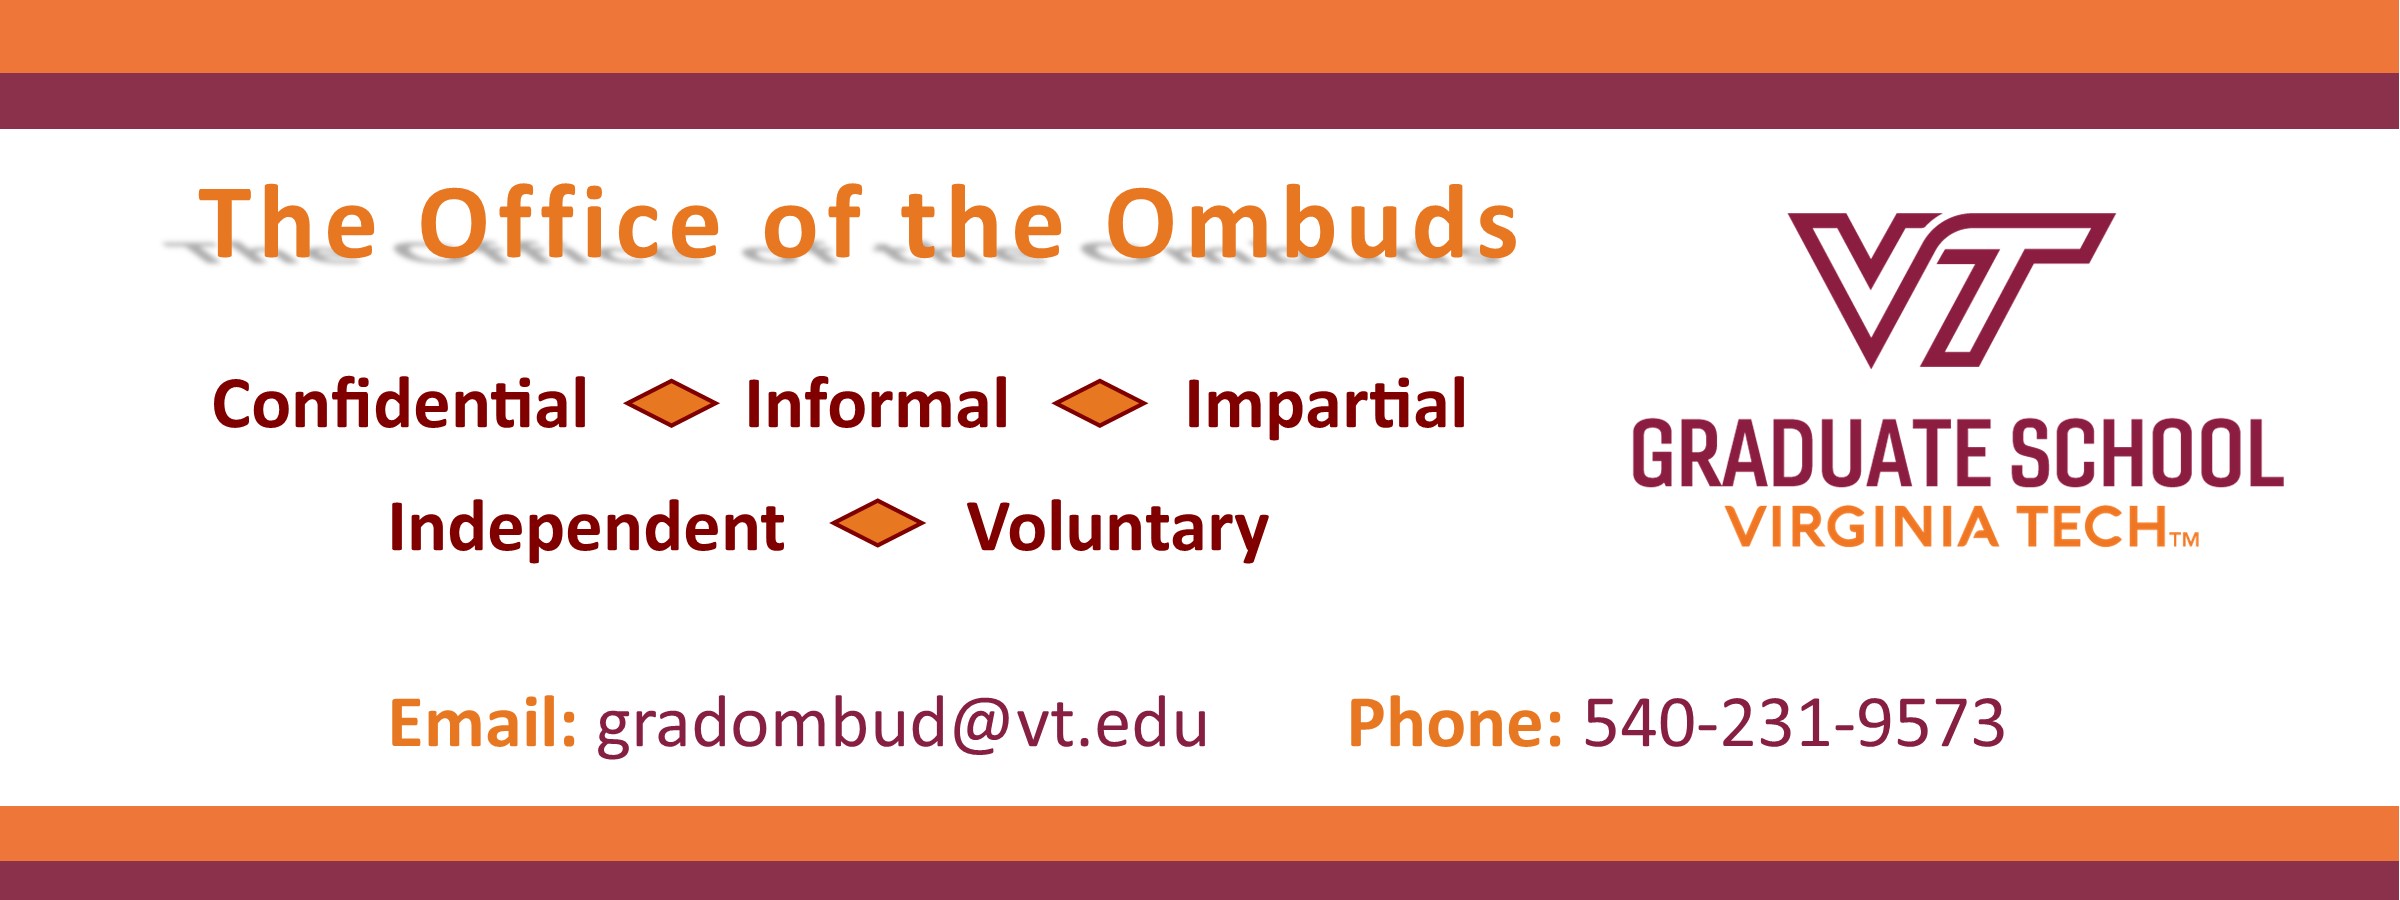 The Ombuds Office Header with contact information